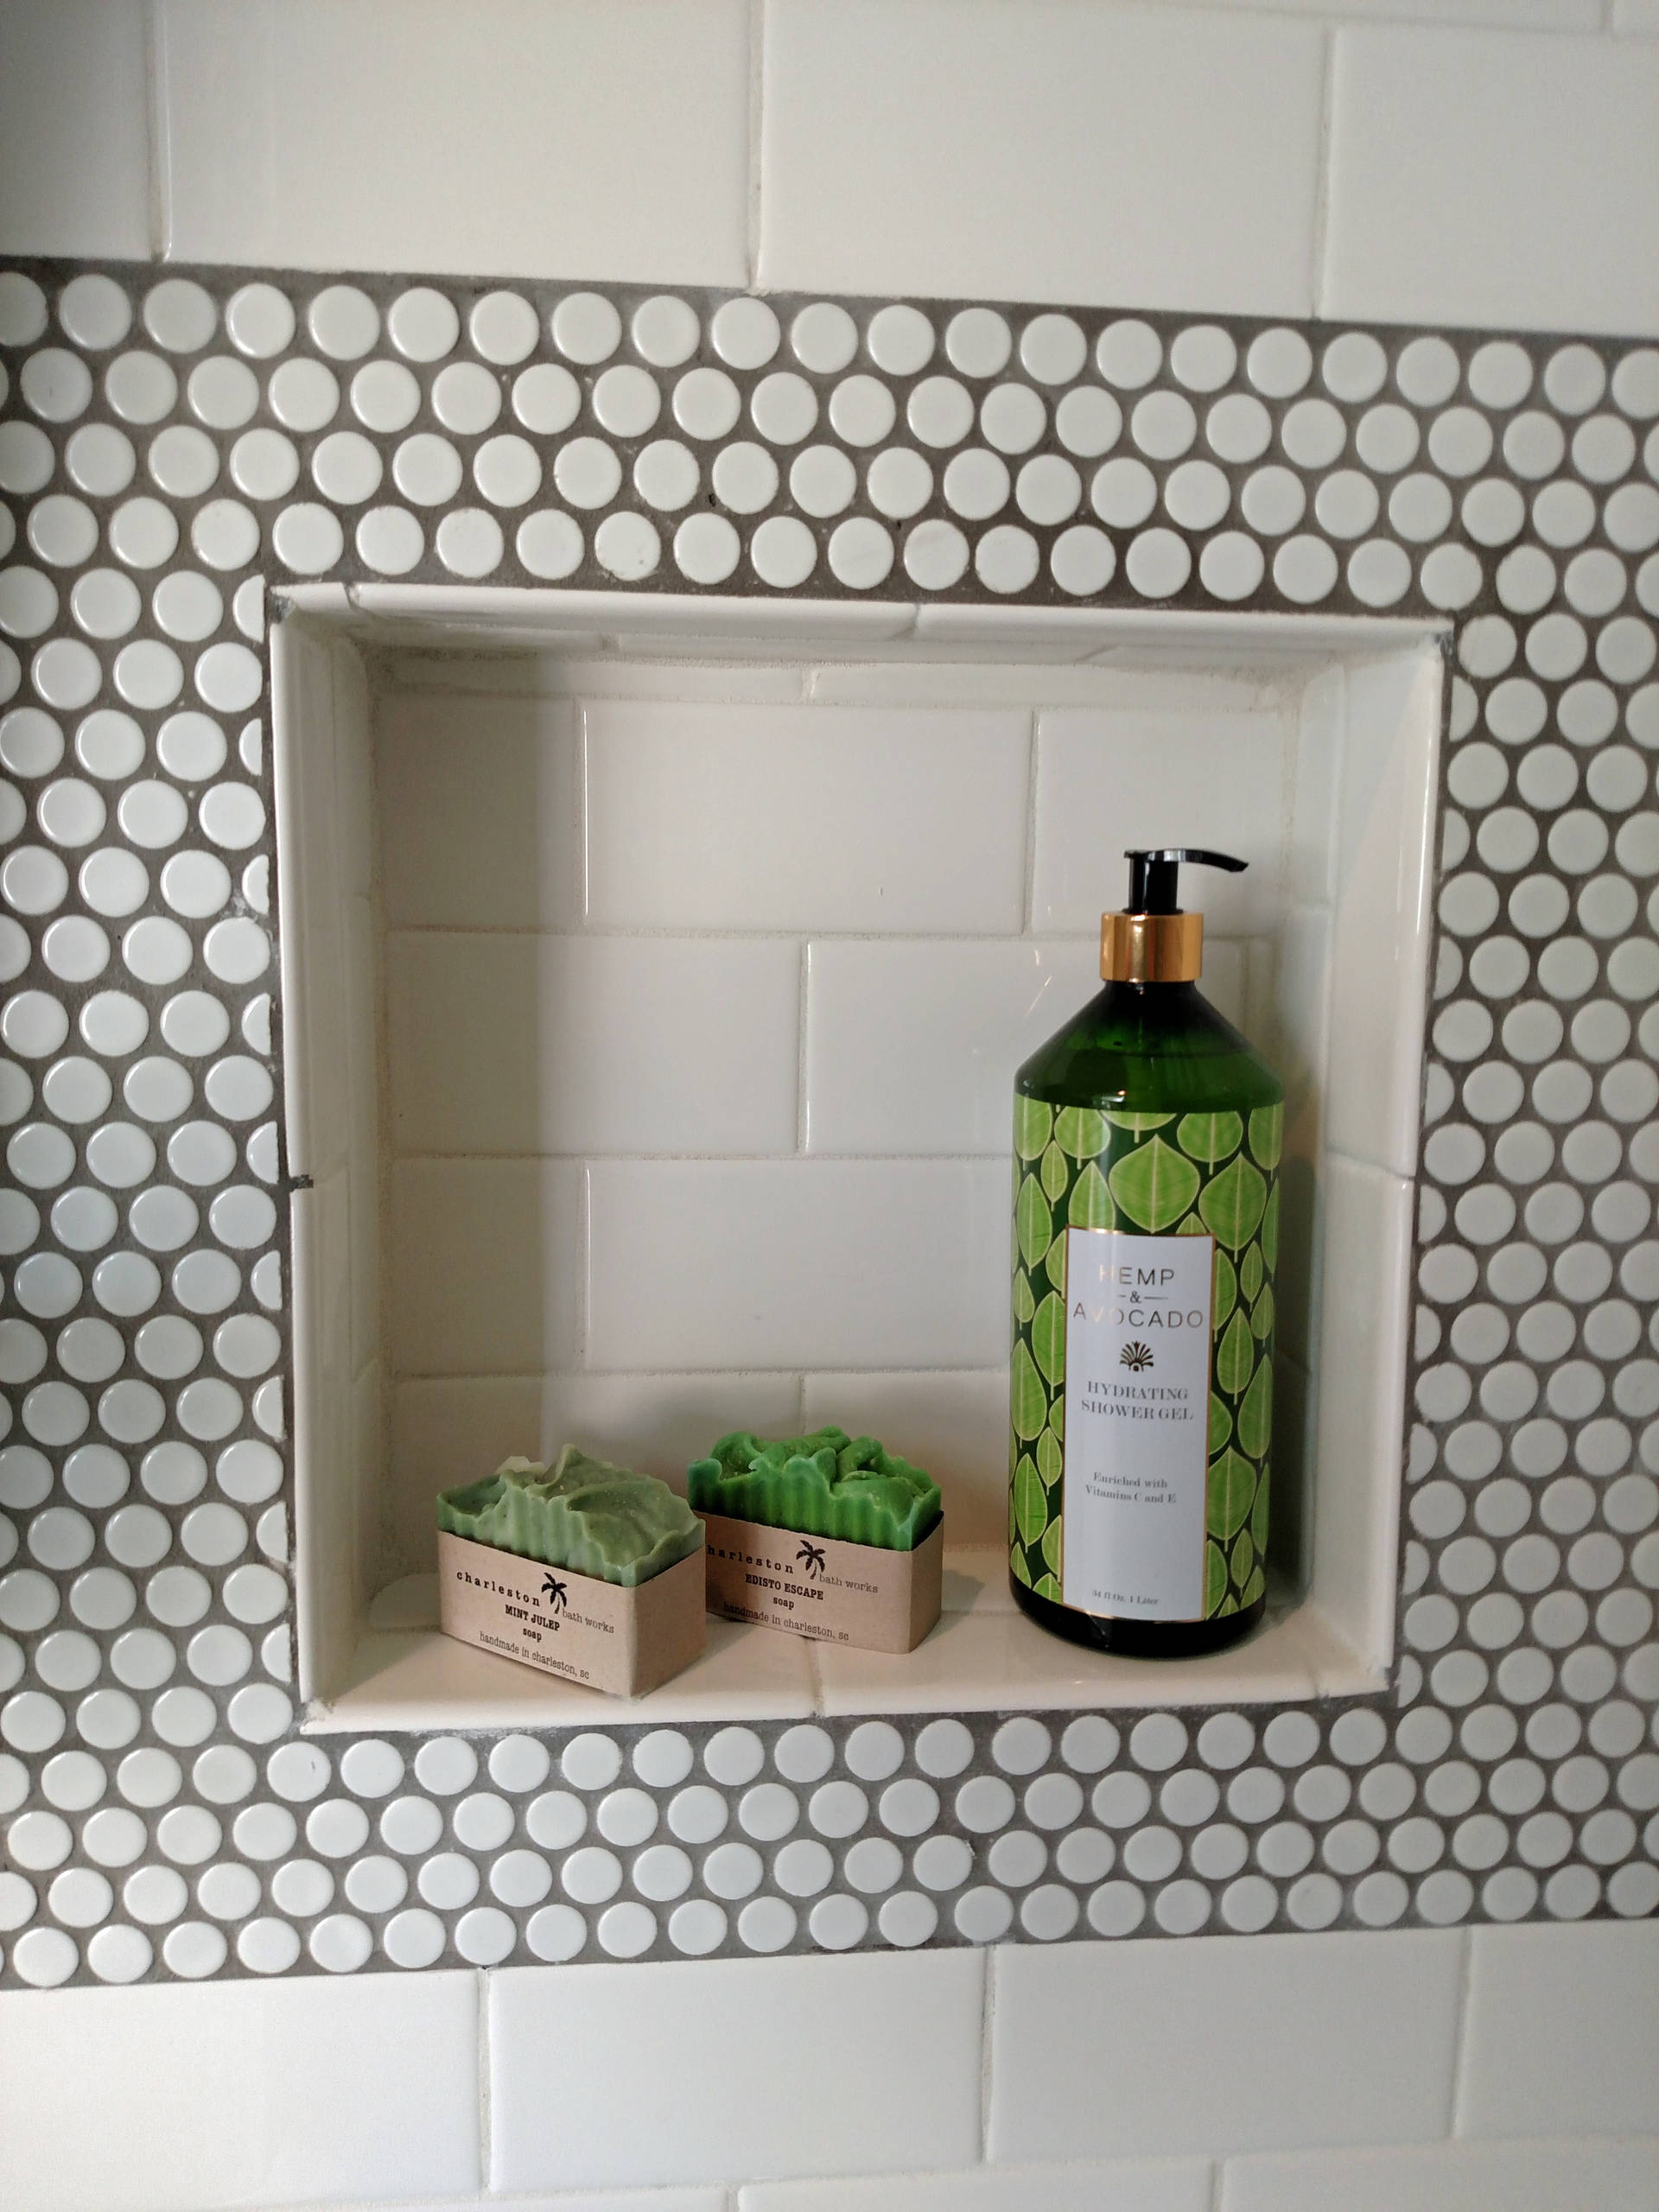 Subway tile with Penny tile accents and floor in a family bathroom.